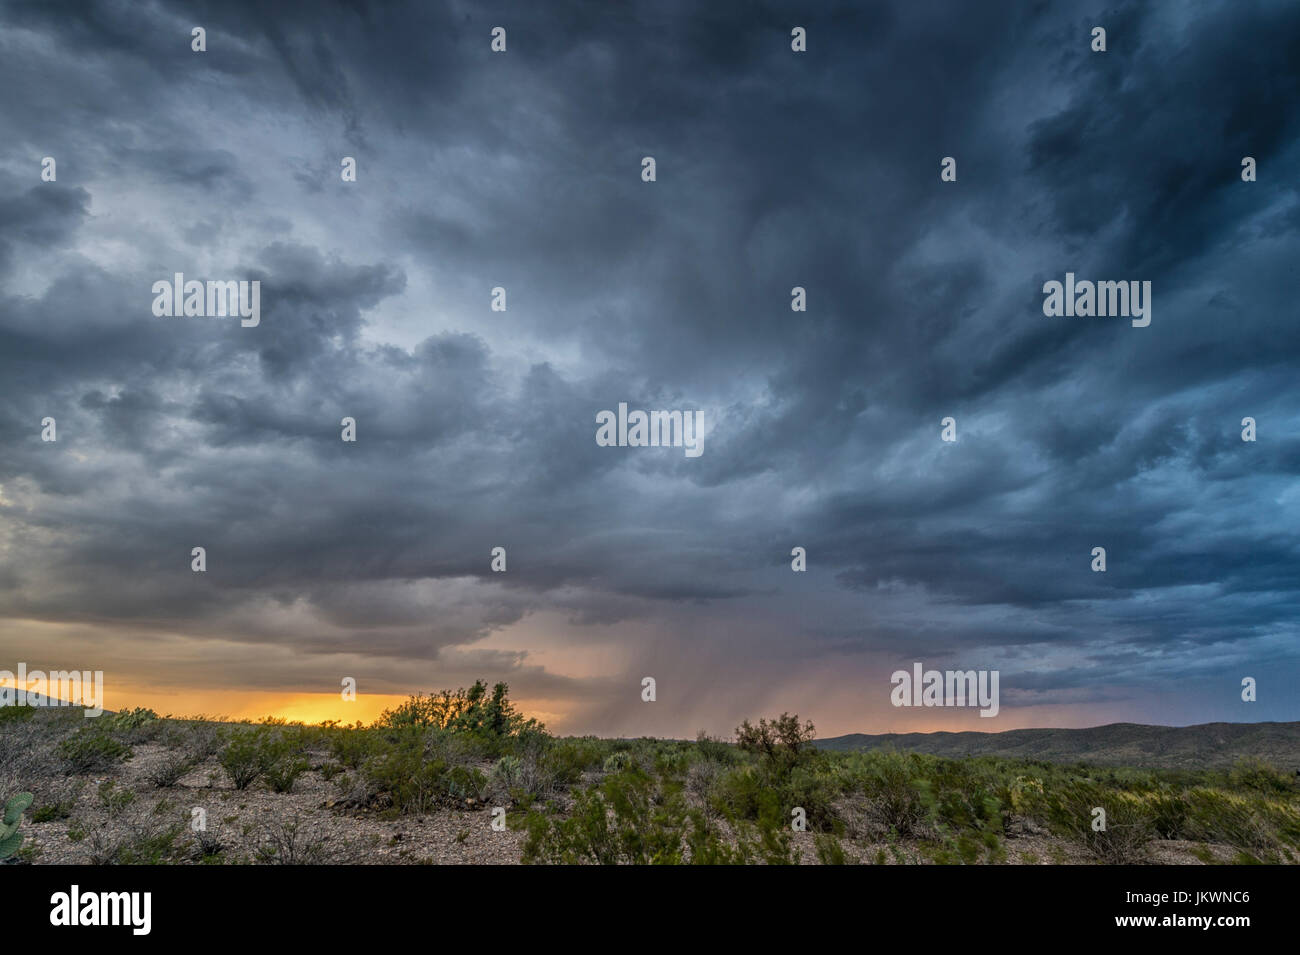 Rain in thunderstorm in Big Bend National Park Stock Photo